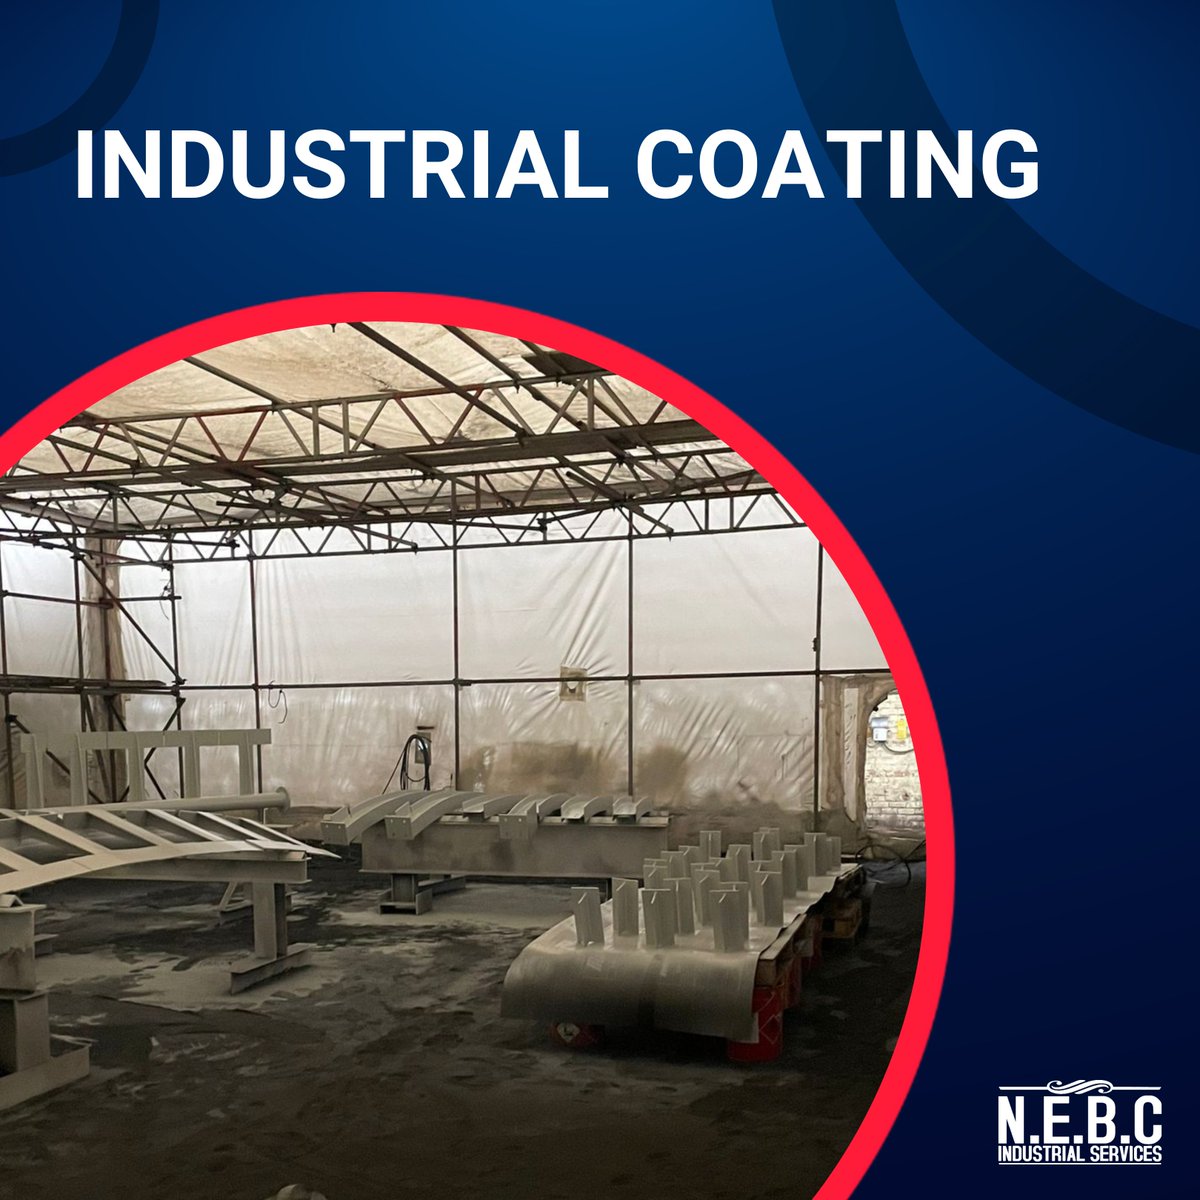 We can help with any of your #IndustrialCoating needs:
🔴 Paint application
🔴 Maintenance coatings
🔴 Thermo-insulating coatings
🔴 Hydro-insulating coating
🔴 Hot apply coatings
🔴 Splash zone application

Speak to us today to find out more! 💬

#coating #coatingservices